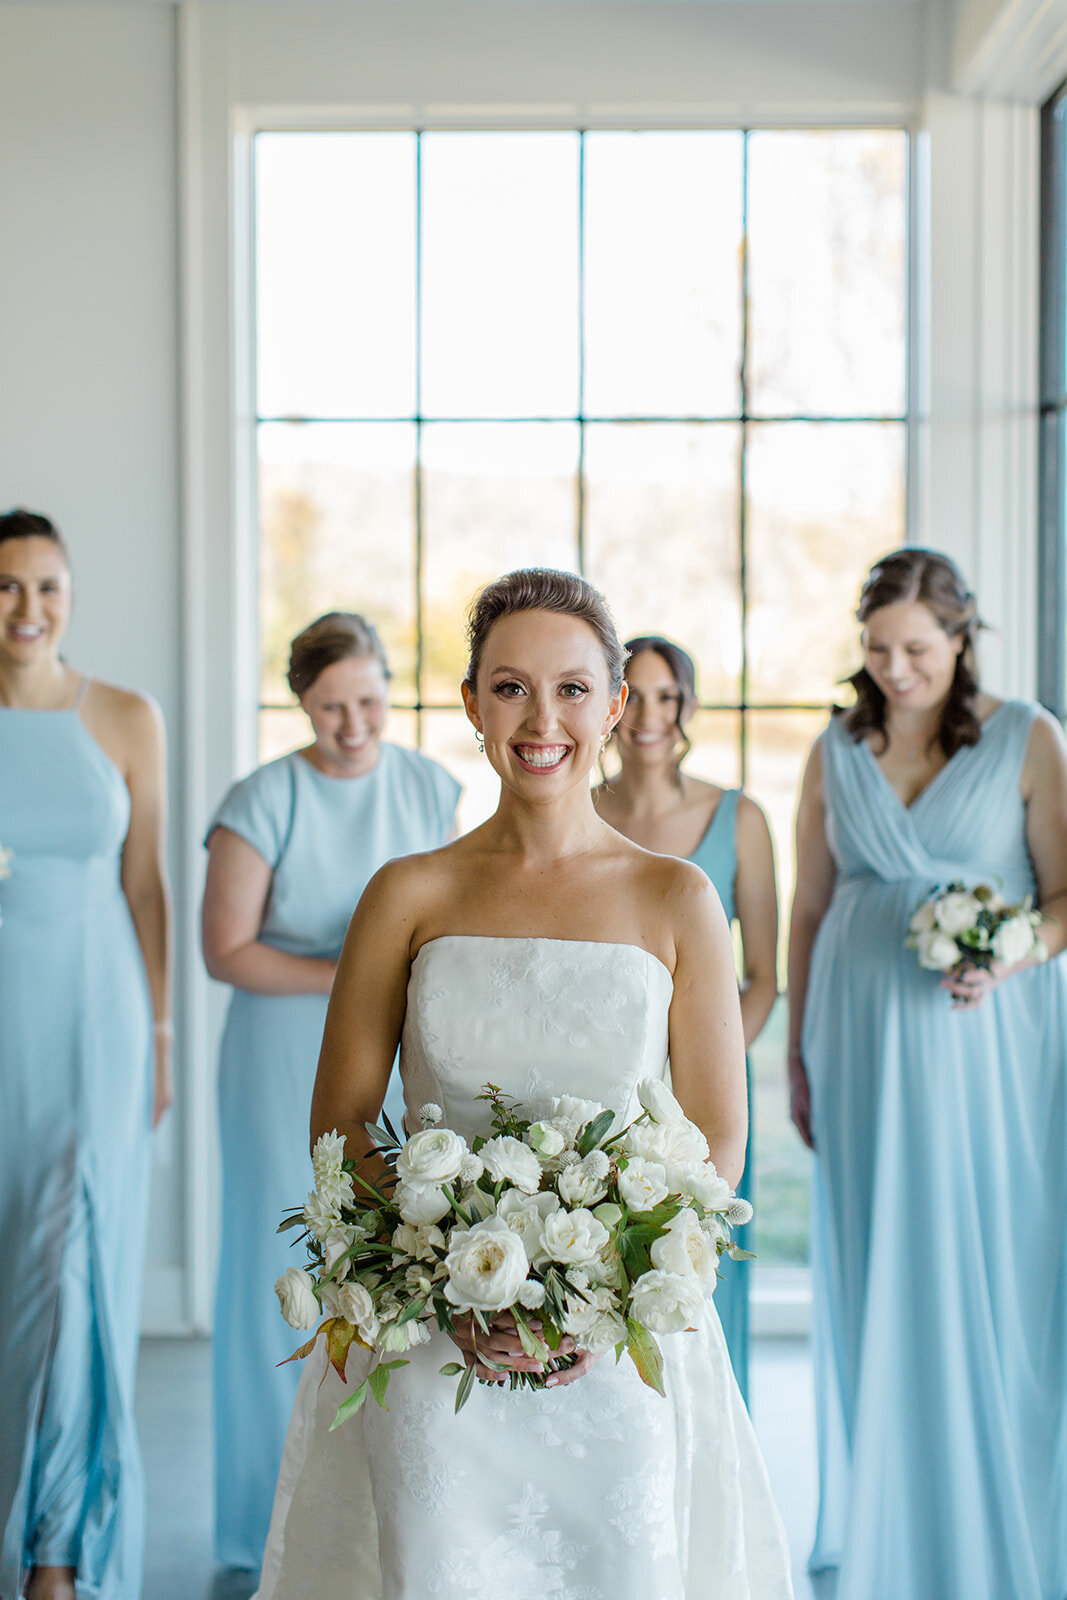 Bride smiling wearing her white gown while smiling with her maids behind wearing blue gown while holding their bouquets